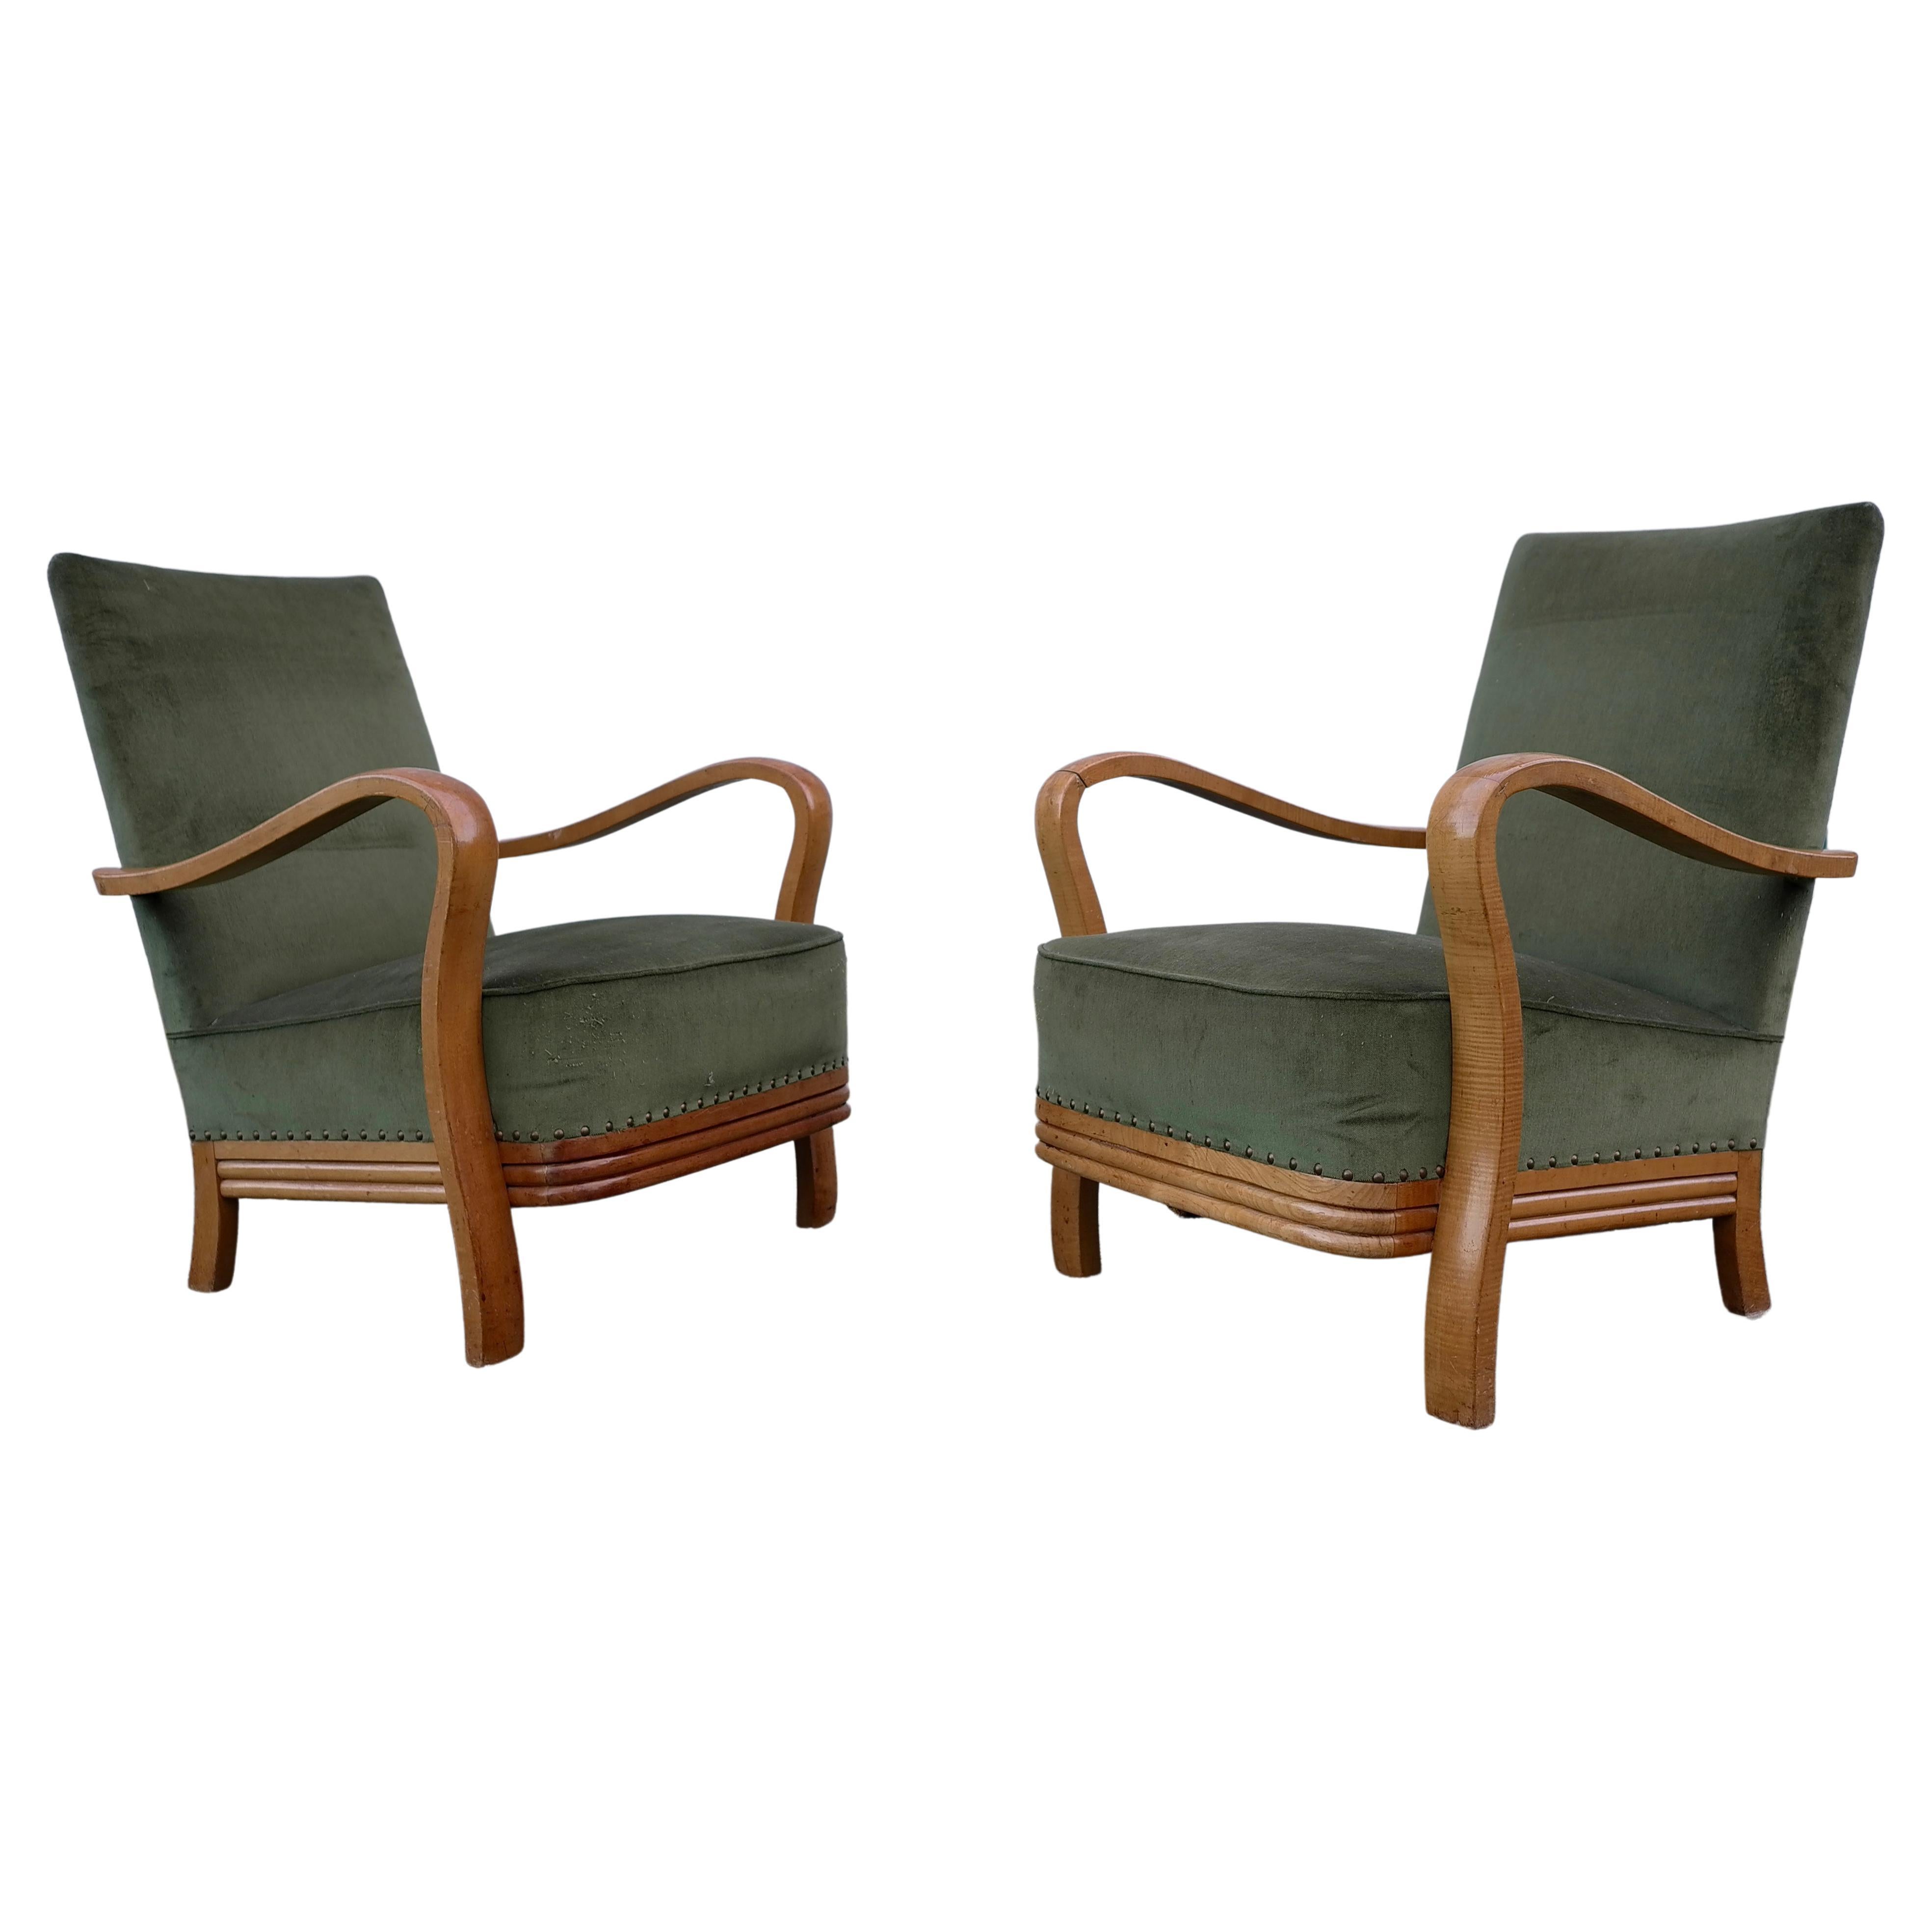 Mid-Century Modern Pair of Wooden Curved Arms Art-Deco Armchairs, France, 1940s For Sale